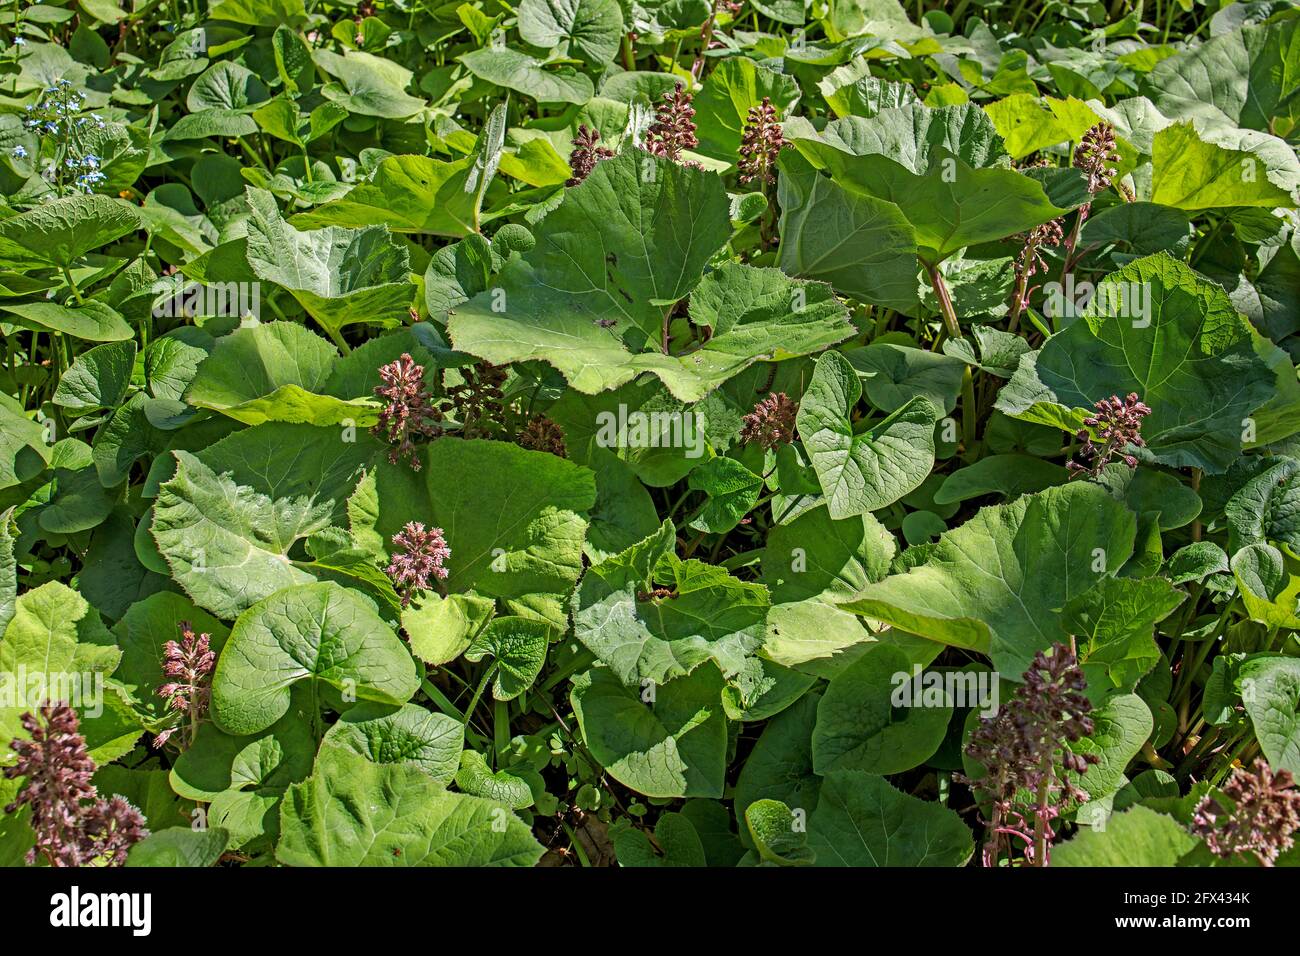 leaves of butterbur or pestilence wort. Petasites hybridus, the butterbur, is a herbaceous perennial flowering plant in the daisy family Asteraceae, n Stock Photo